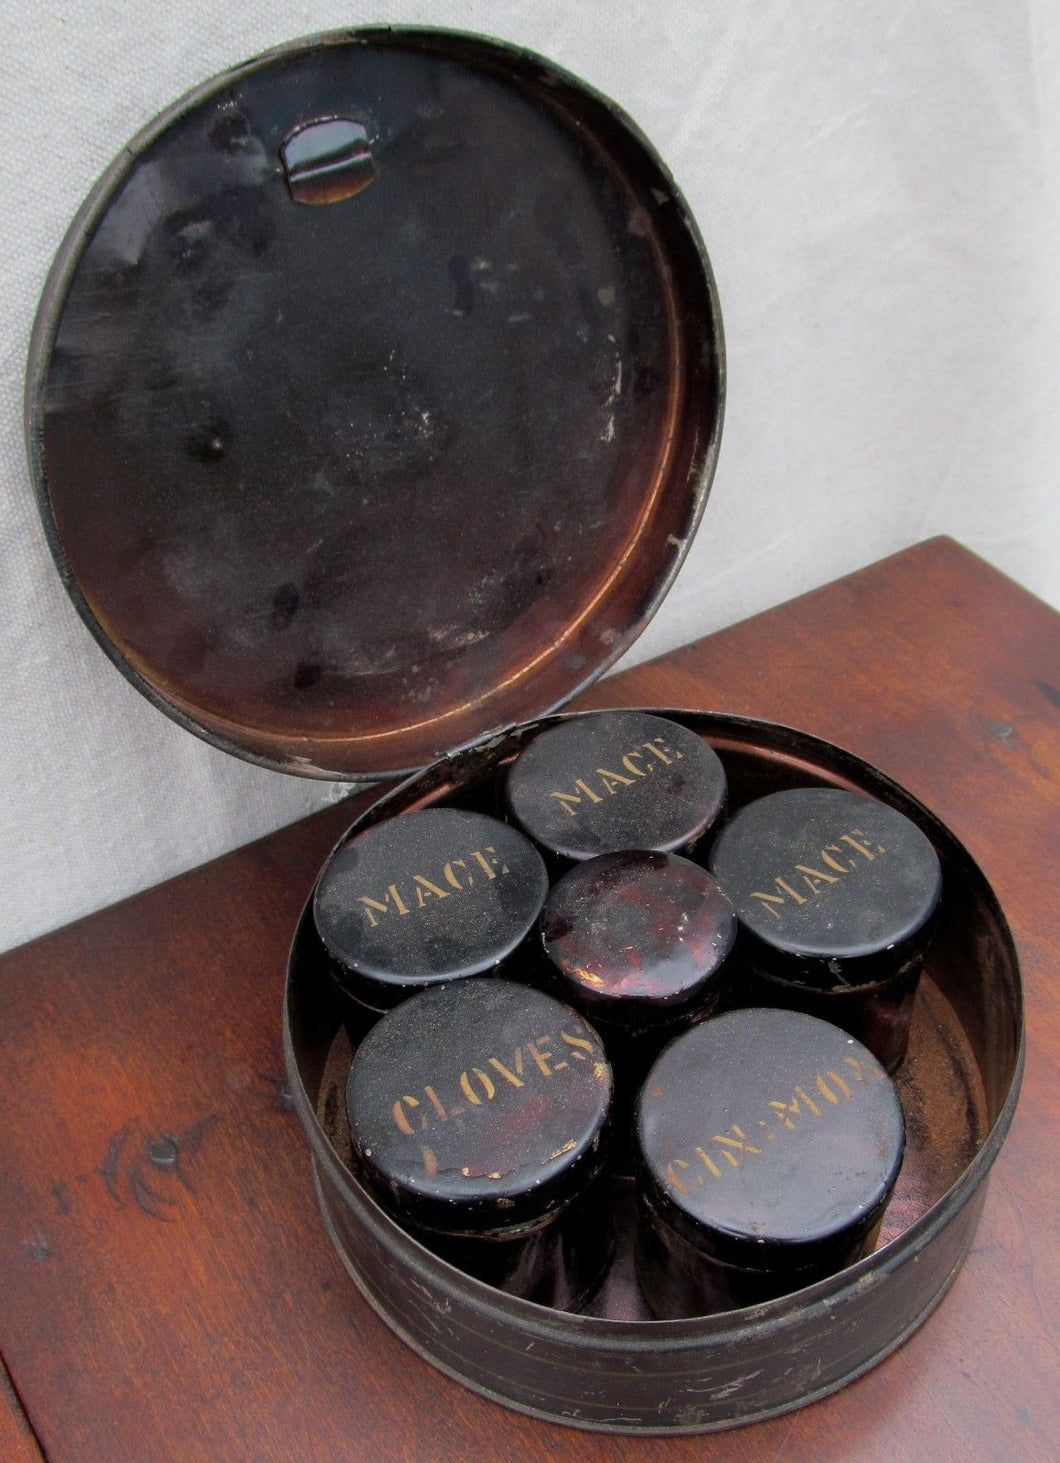 19th CENTURY SHAKER TOLEWARE SPICE CANISTER SET WITH SIX LIDDED SPICE TIN JARS